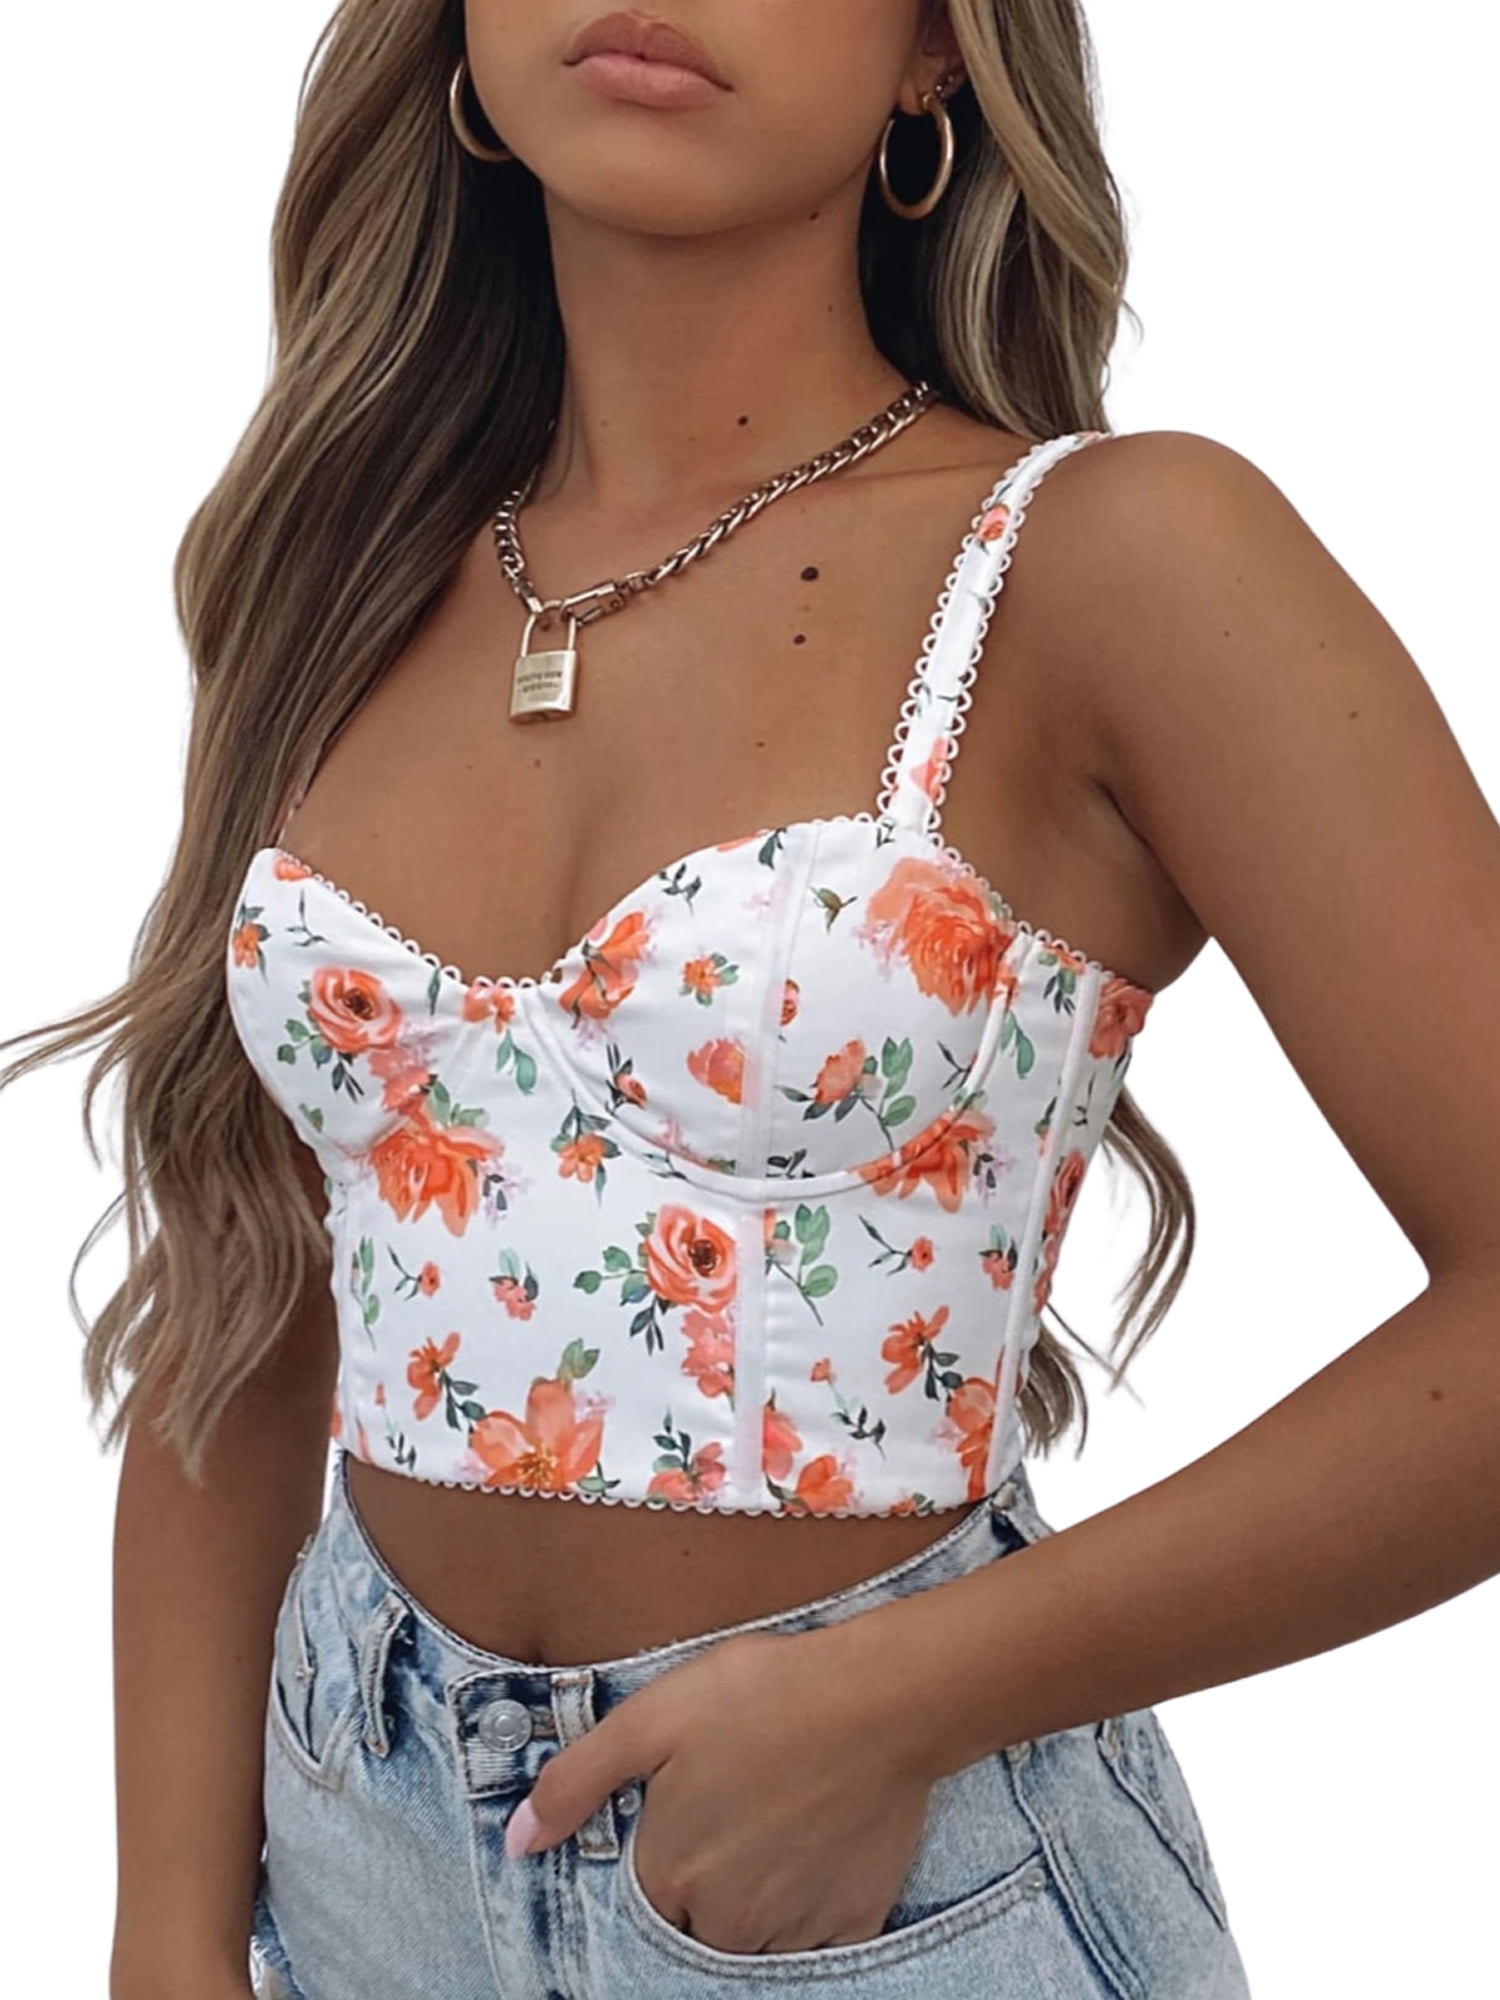 Buy Vintage Floral Corset Crop Top Women Bustier Top Sexy Flower Top  Camisole Y2K Tanks Palace Style Women Cami Bralette Shirt Skirt at  affordable prices — free shipping, real reviews with photos —